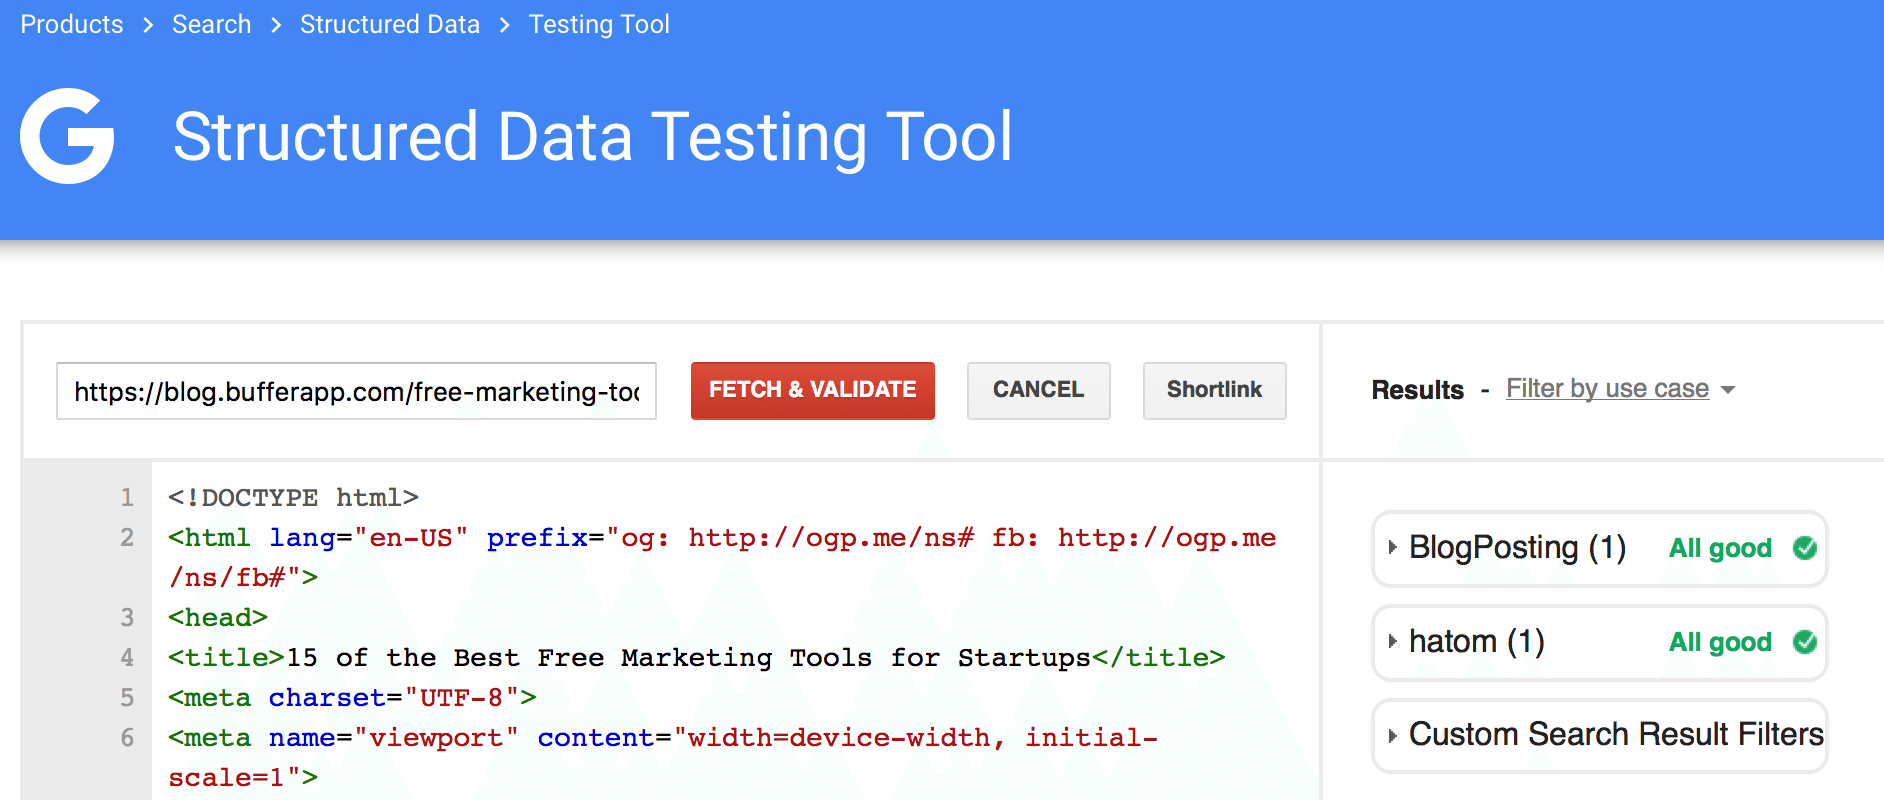 Structured Data Testing Tool